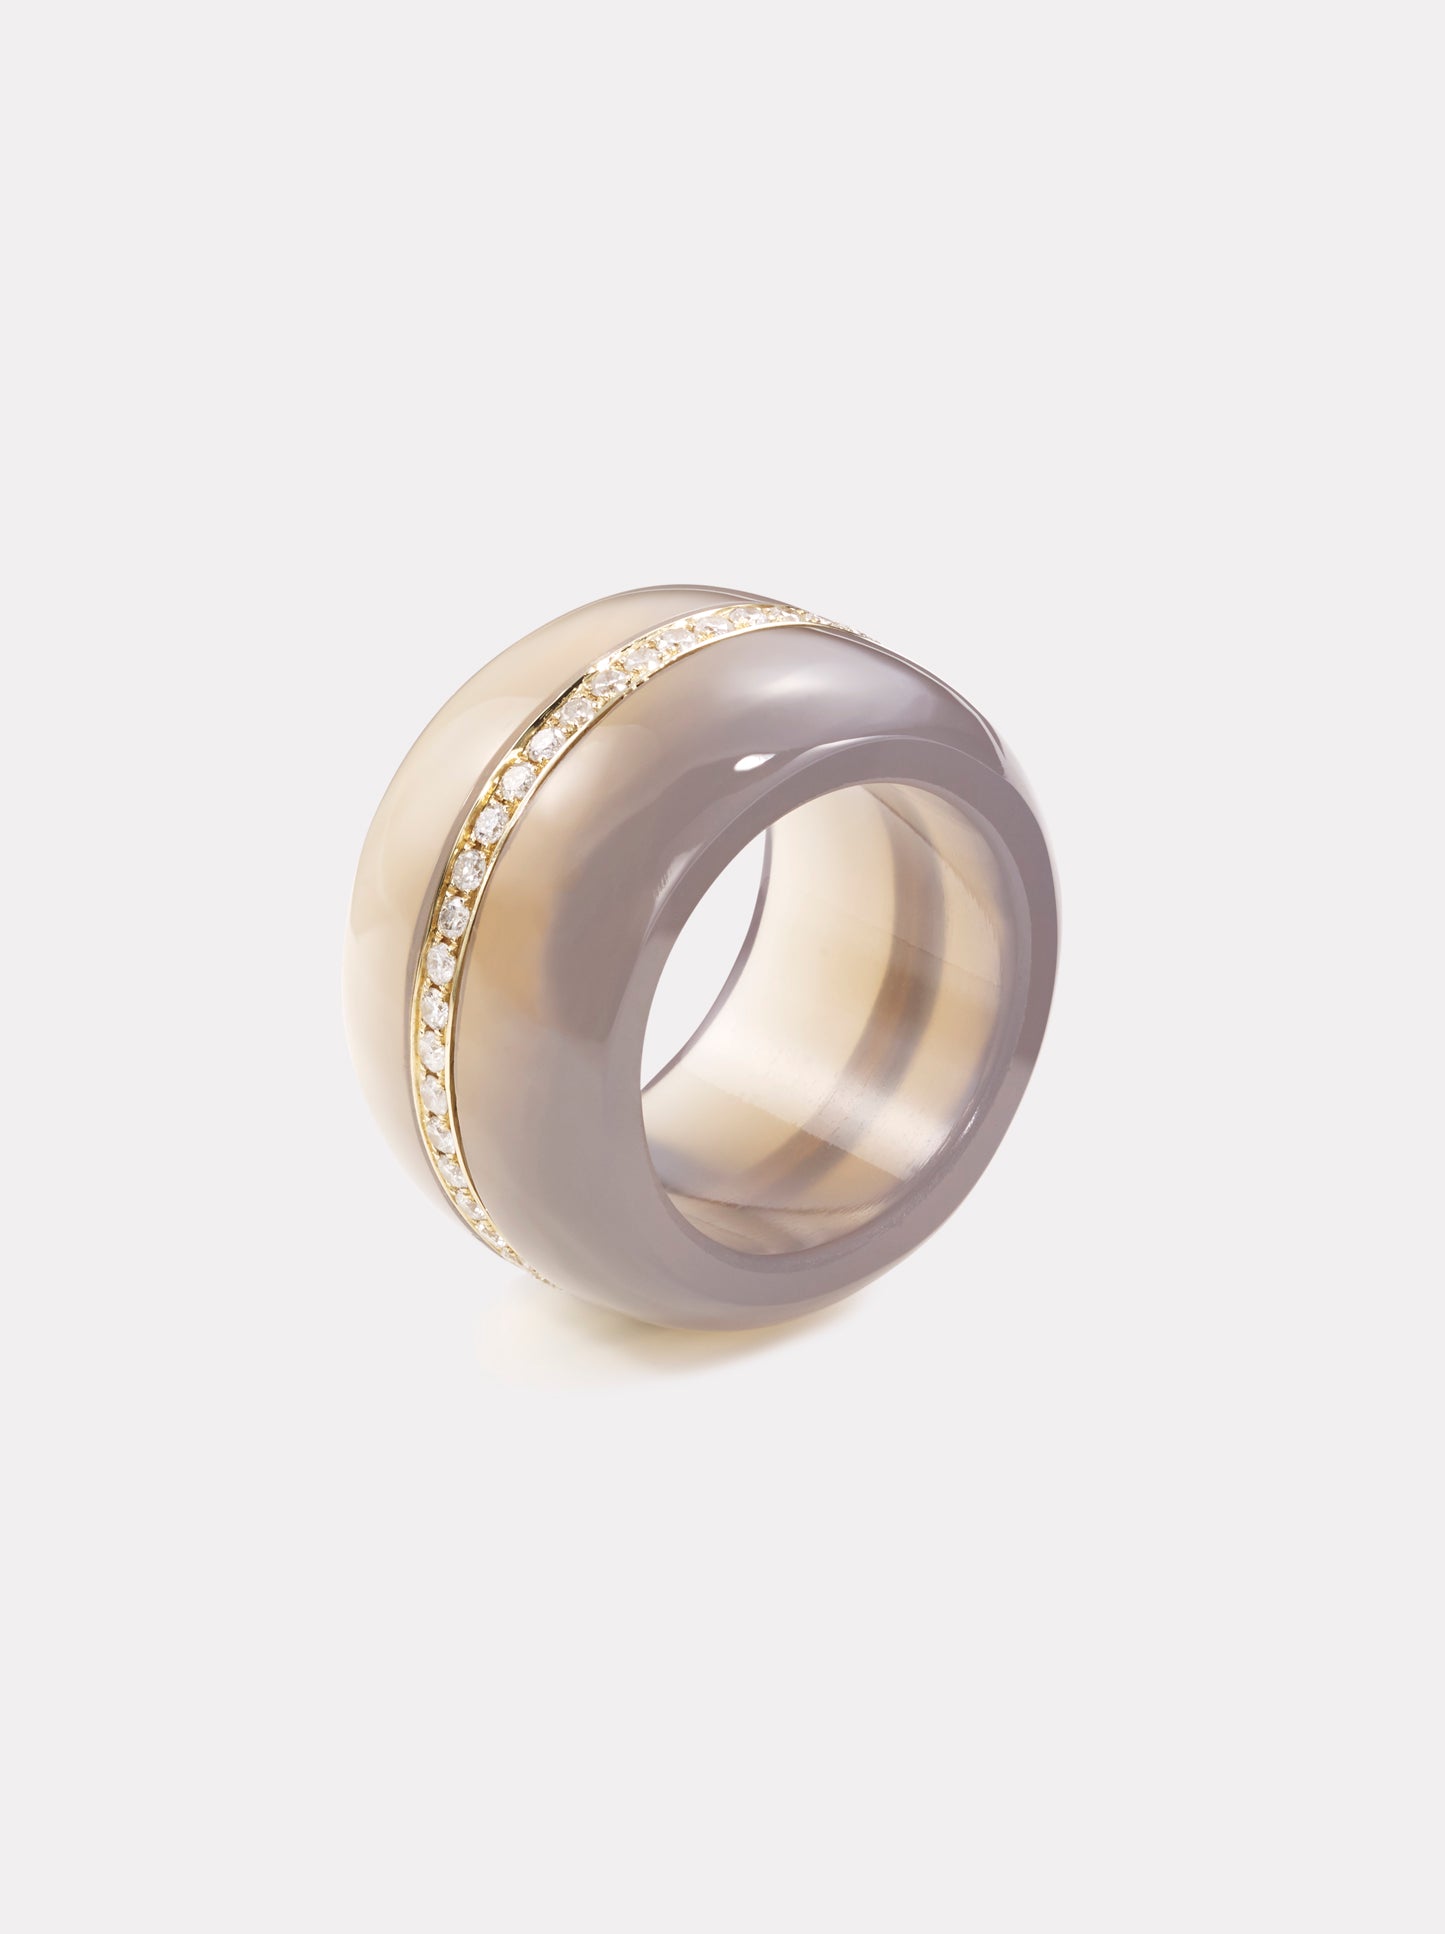 Diamond Pebble Cocktail Ring in Dark Grey Agate (Made to Order)